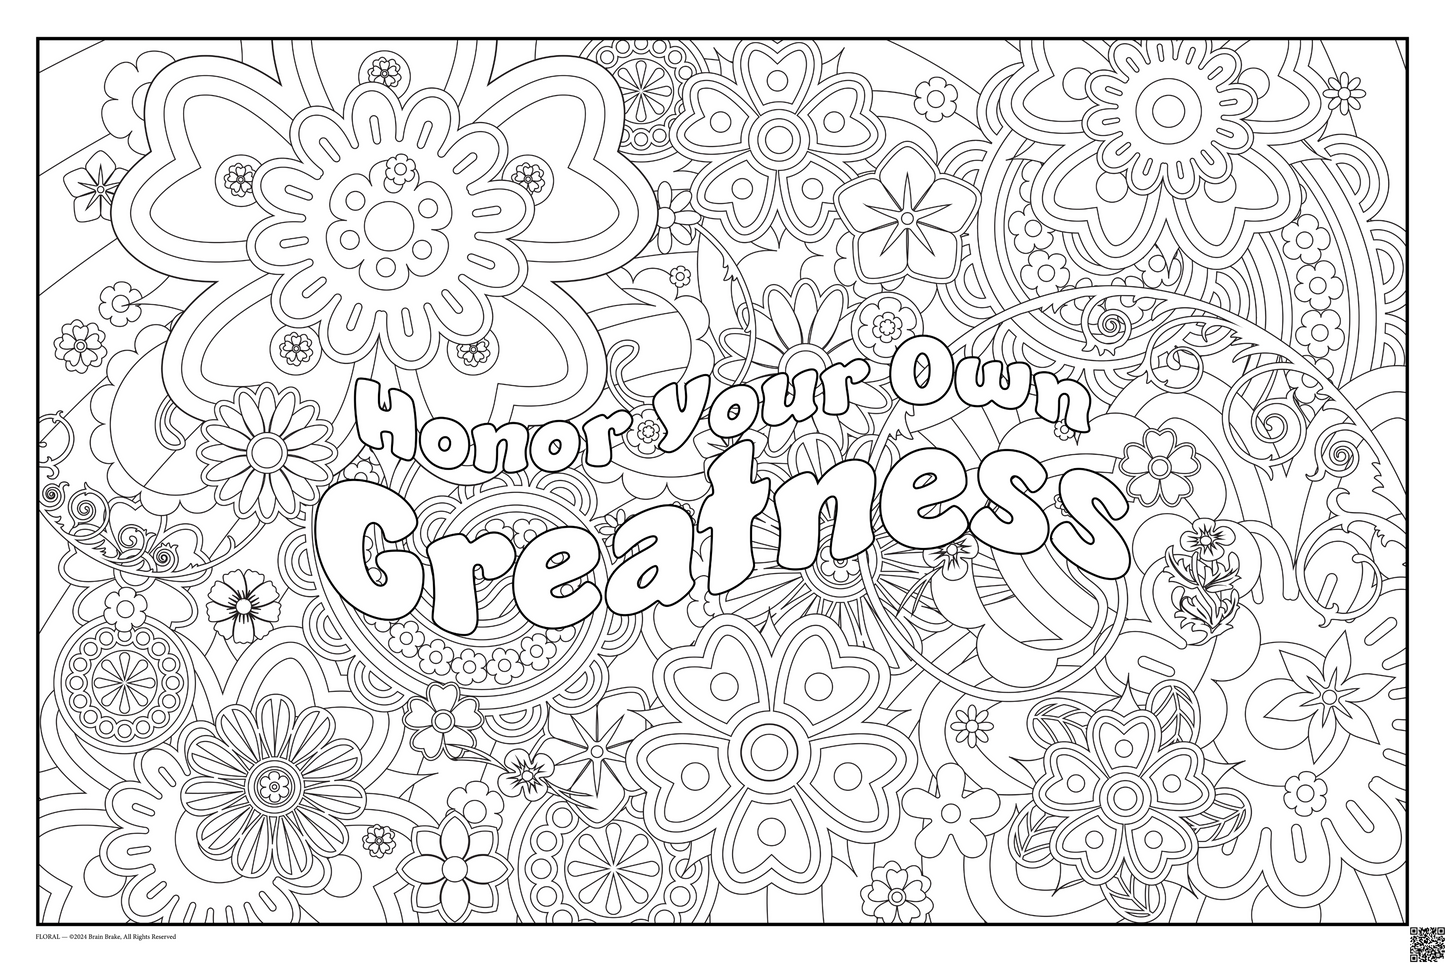 Build Community: Honor Your Own Greatness